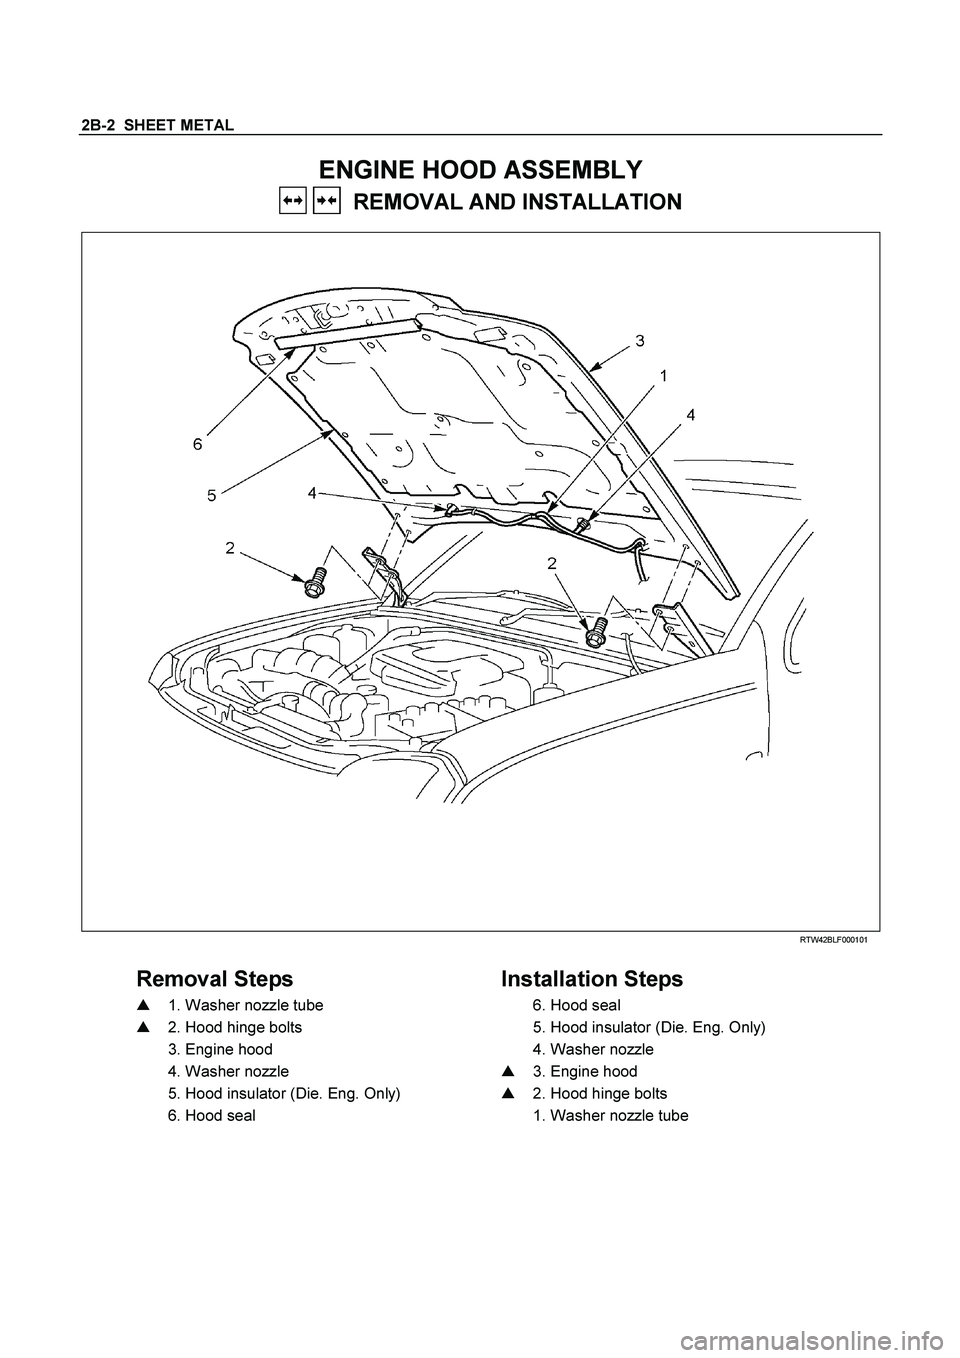 ISUZU TF SERIES 2004  Workshop Manual 2B-2  SHEET METAL 
ENGINE HOOD ASSEMBLY  
   REMOVAL AND INSTALLATION 
   
  
 
 
 RTW42BLF000101 
 
Removal Steps     
Installation Steps 
   
1. Washer nozzle tube      
6. Hood seal   
    
2. Ho